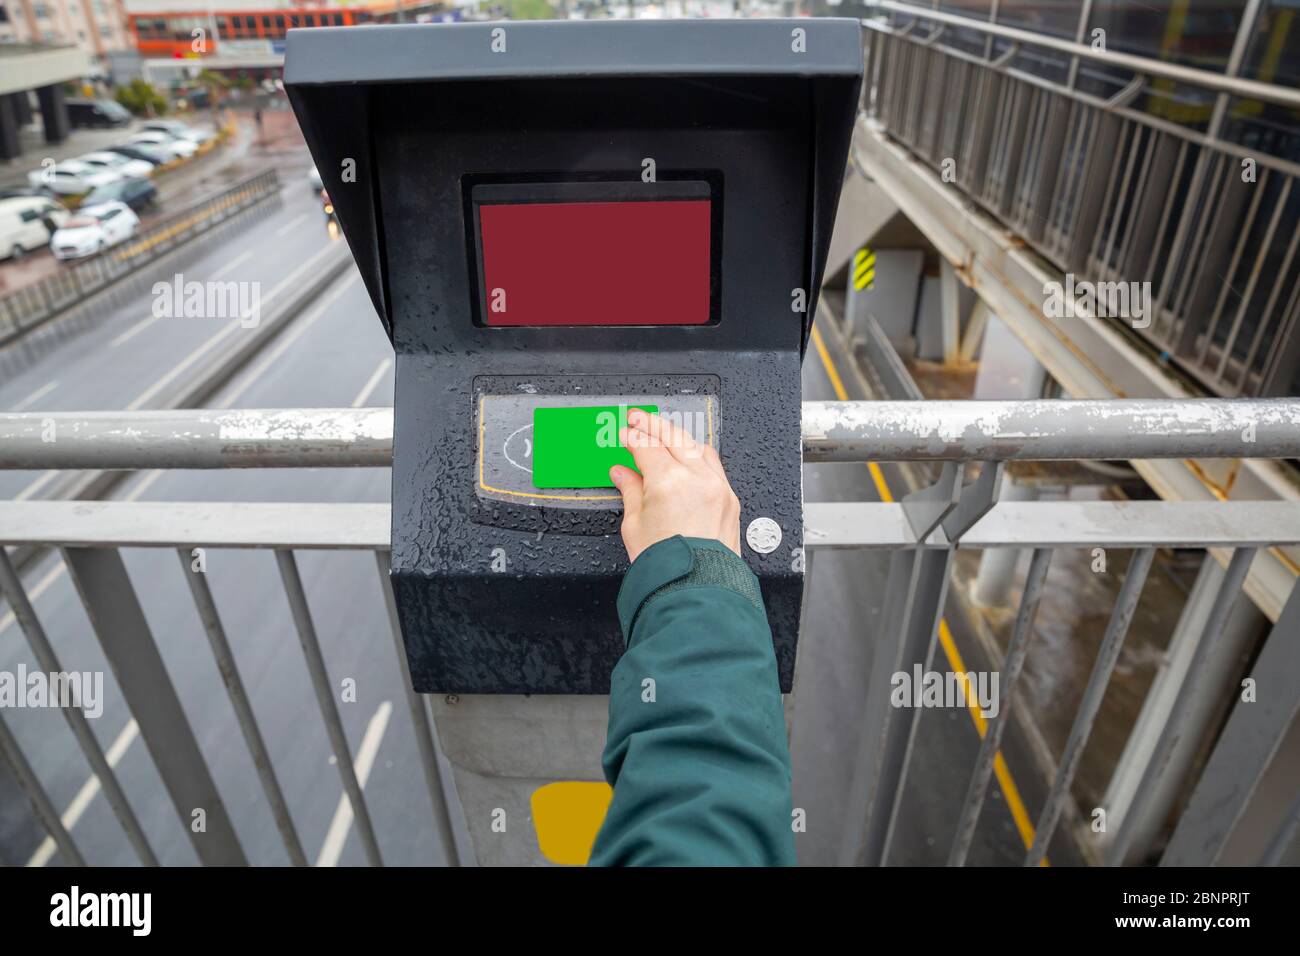 Smartcard ticketing system for public transport services Stock Photo